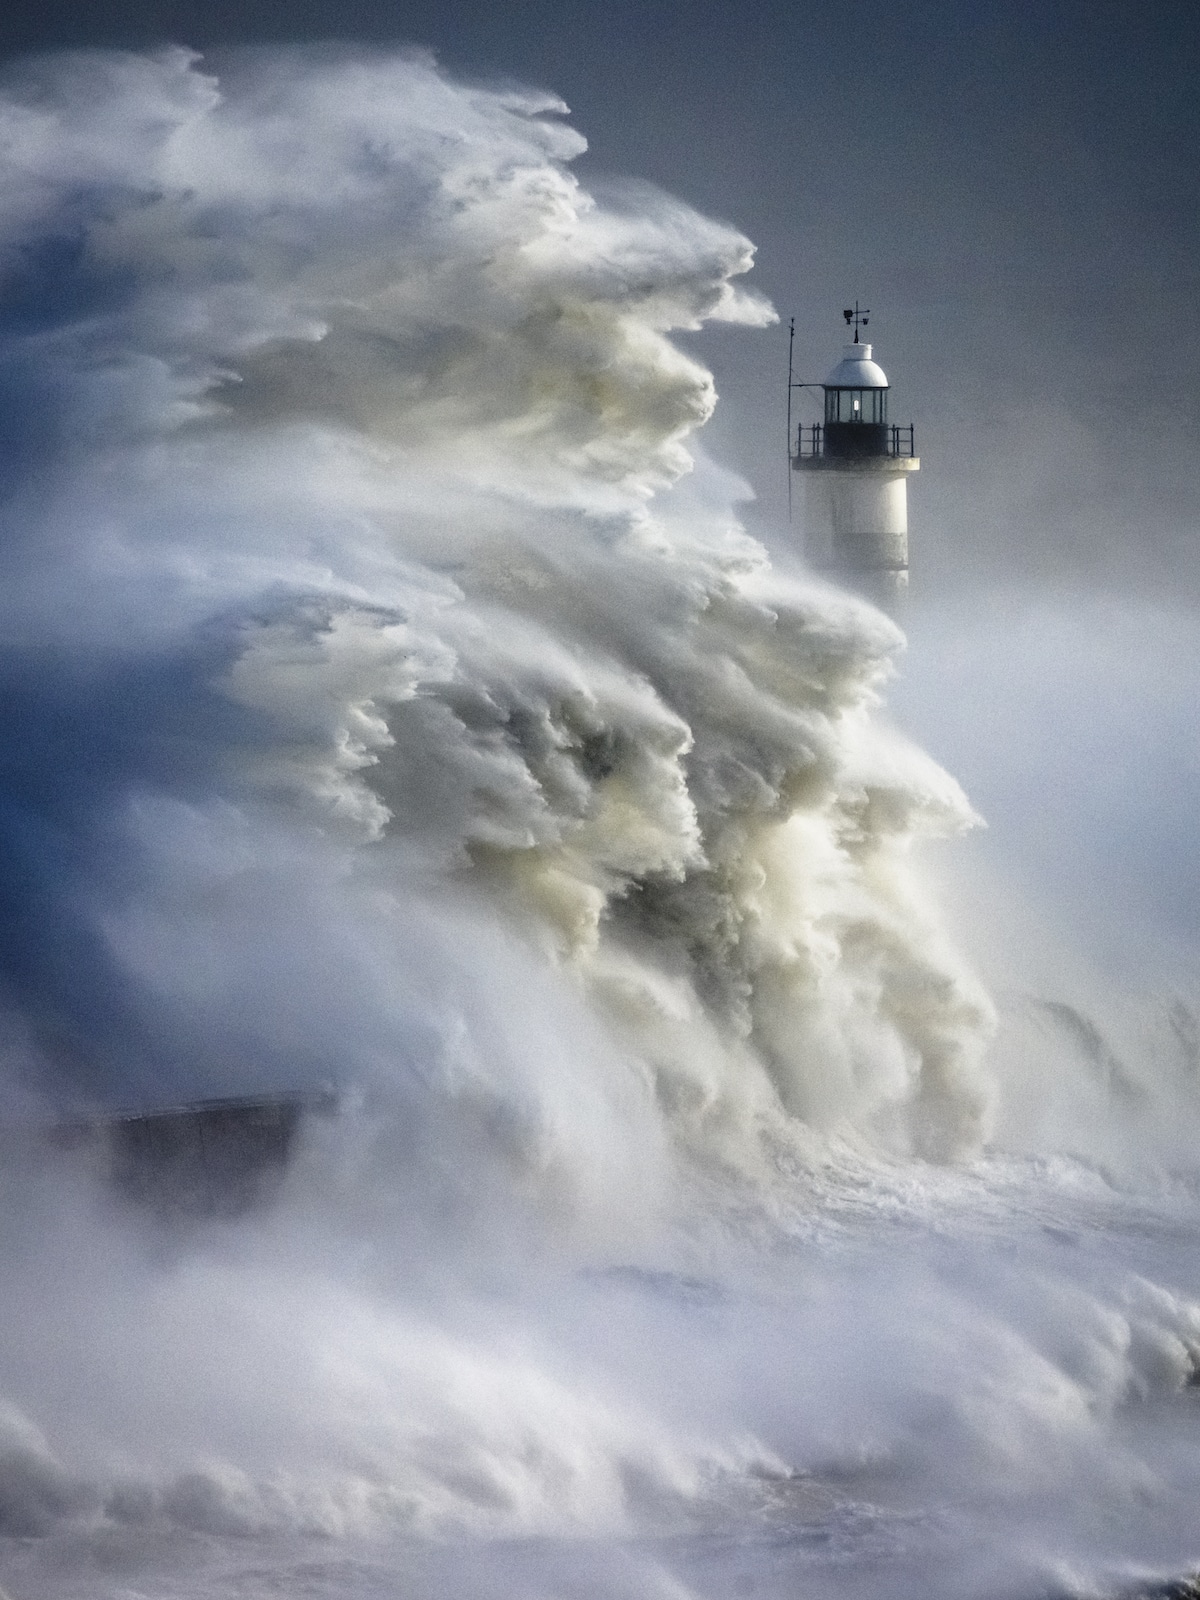 Waves from Storm Eunice Battering Lighthouse in Newhaven, UK